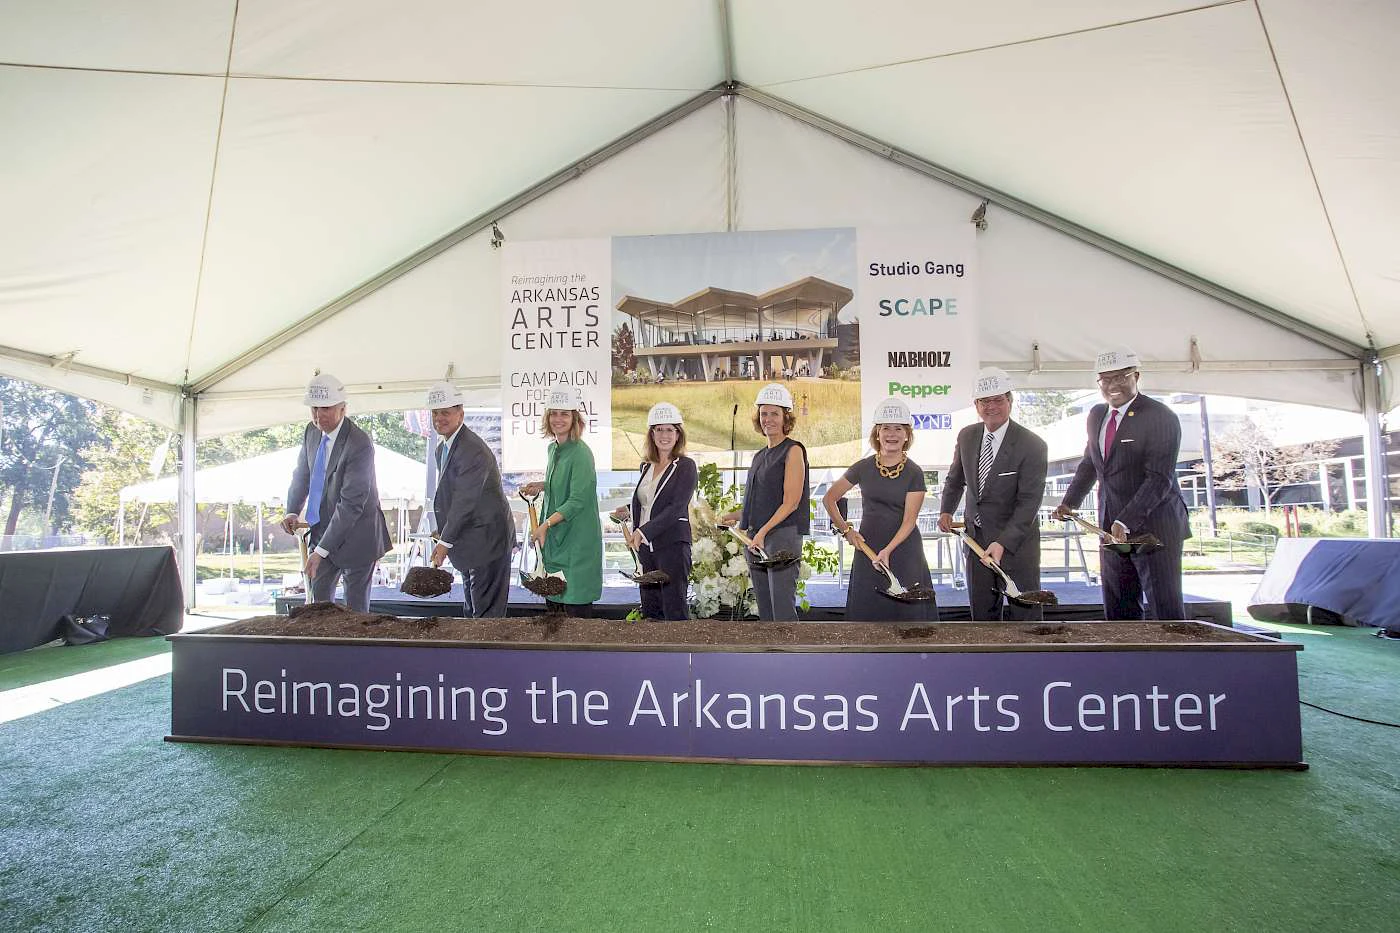 Arkansas Arts Center Foundation President Bobby Tucker, Board of Trustees President Merritt Dyke, SCAPE Founder and Design Director Kate Orff, Arkansas Arts Center Executive Director Victoria Ramirez, Studio Gang Founding Principal Jeanne Gang, Capital Campaign Co-Chairs Harriet and Warren Stephens, and Little Rock Mayor Frank Scott, Jr. at Tuesday’s Groundbreaking Ceremony